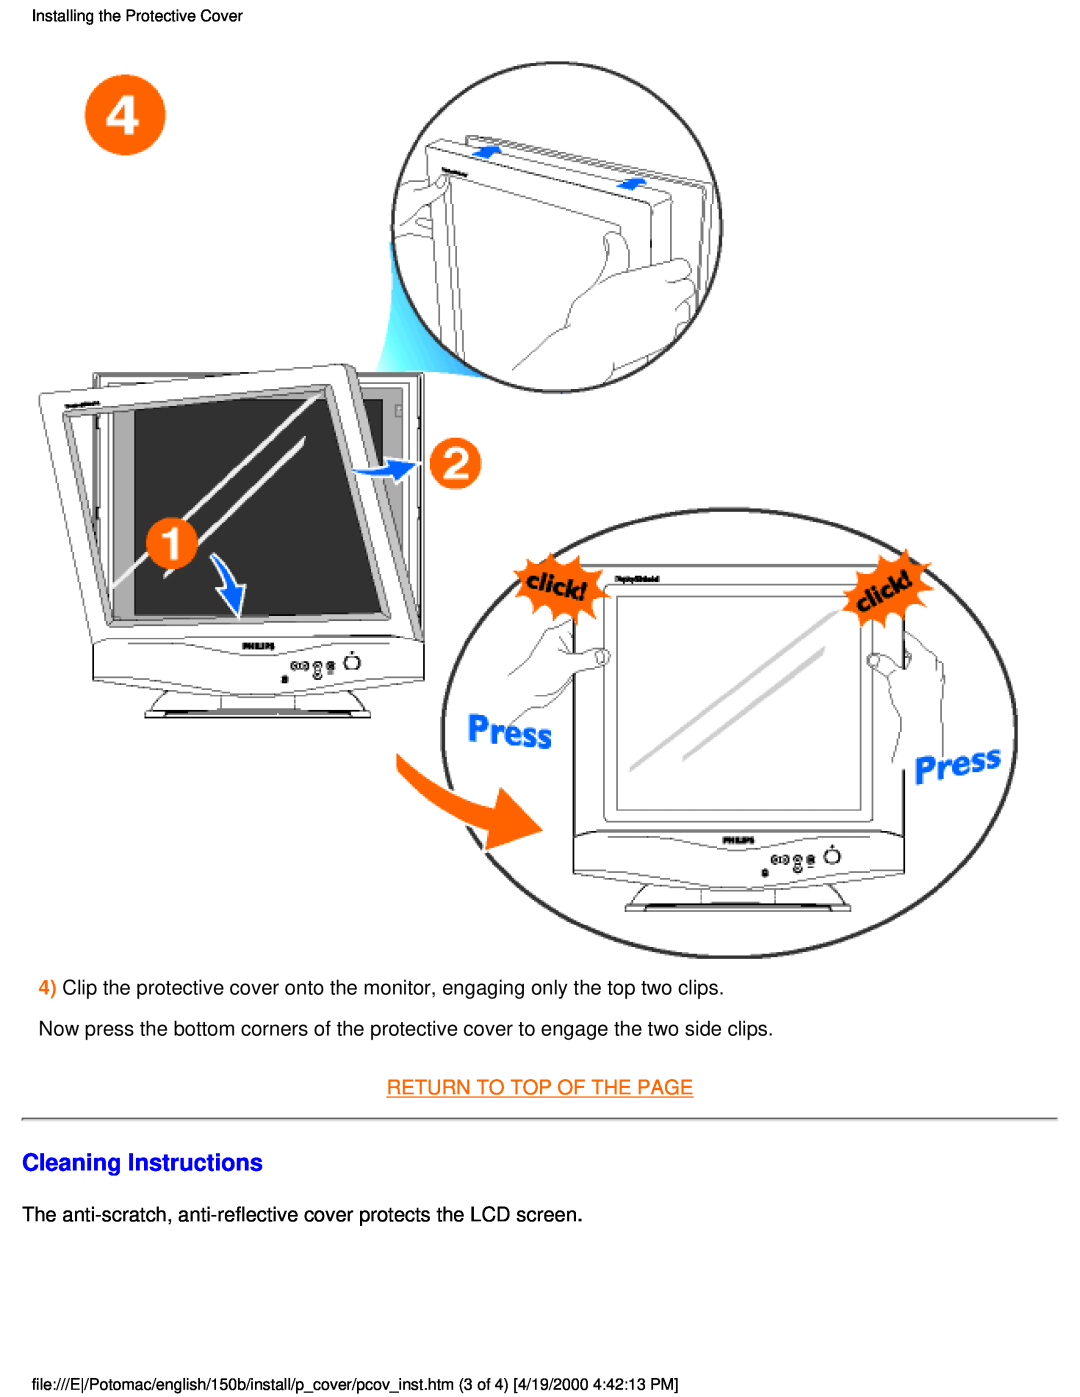 Philips 150B user manual Cleaning Instructions, Return To Top Of The Page, Installing the Protective Cover 